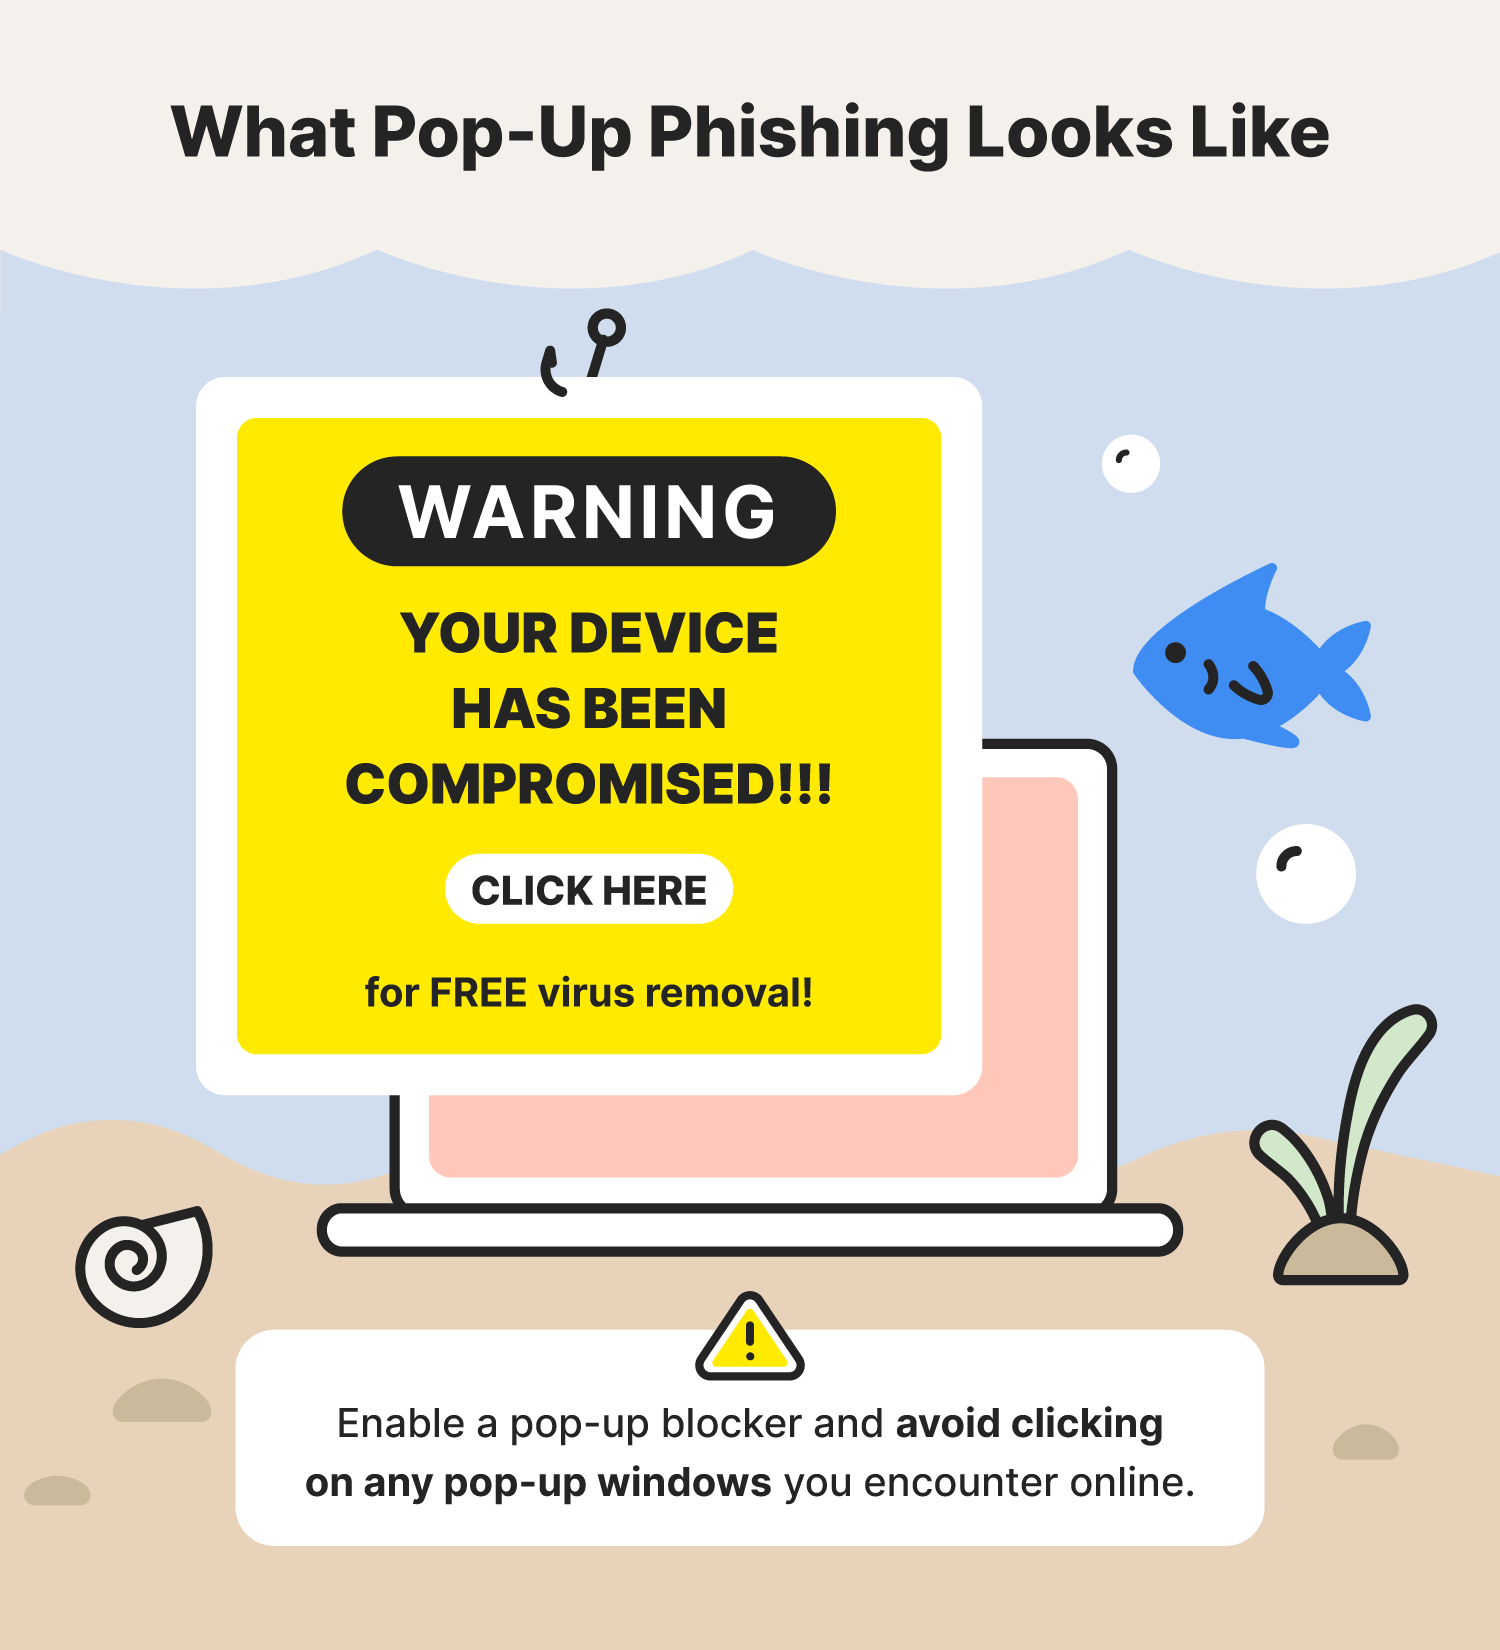 A graphic shows an example of pop-up phishing, one of the common types of phishing attacks.